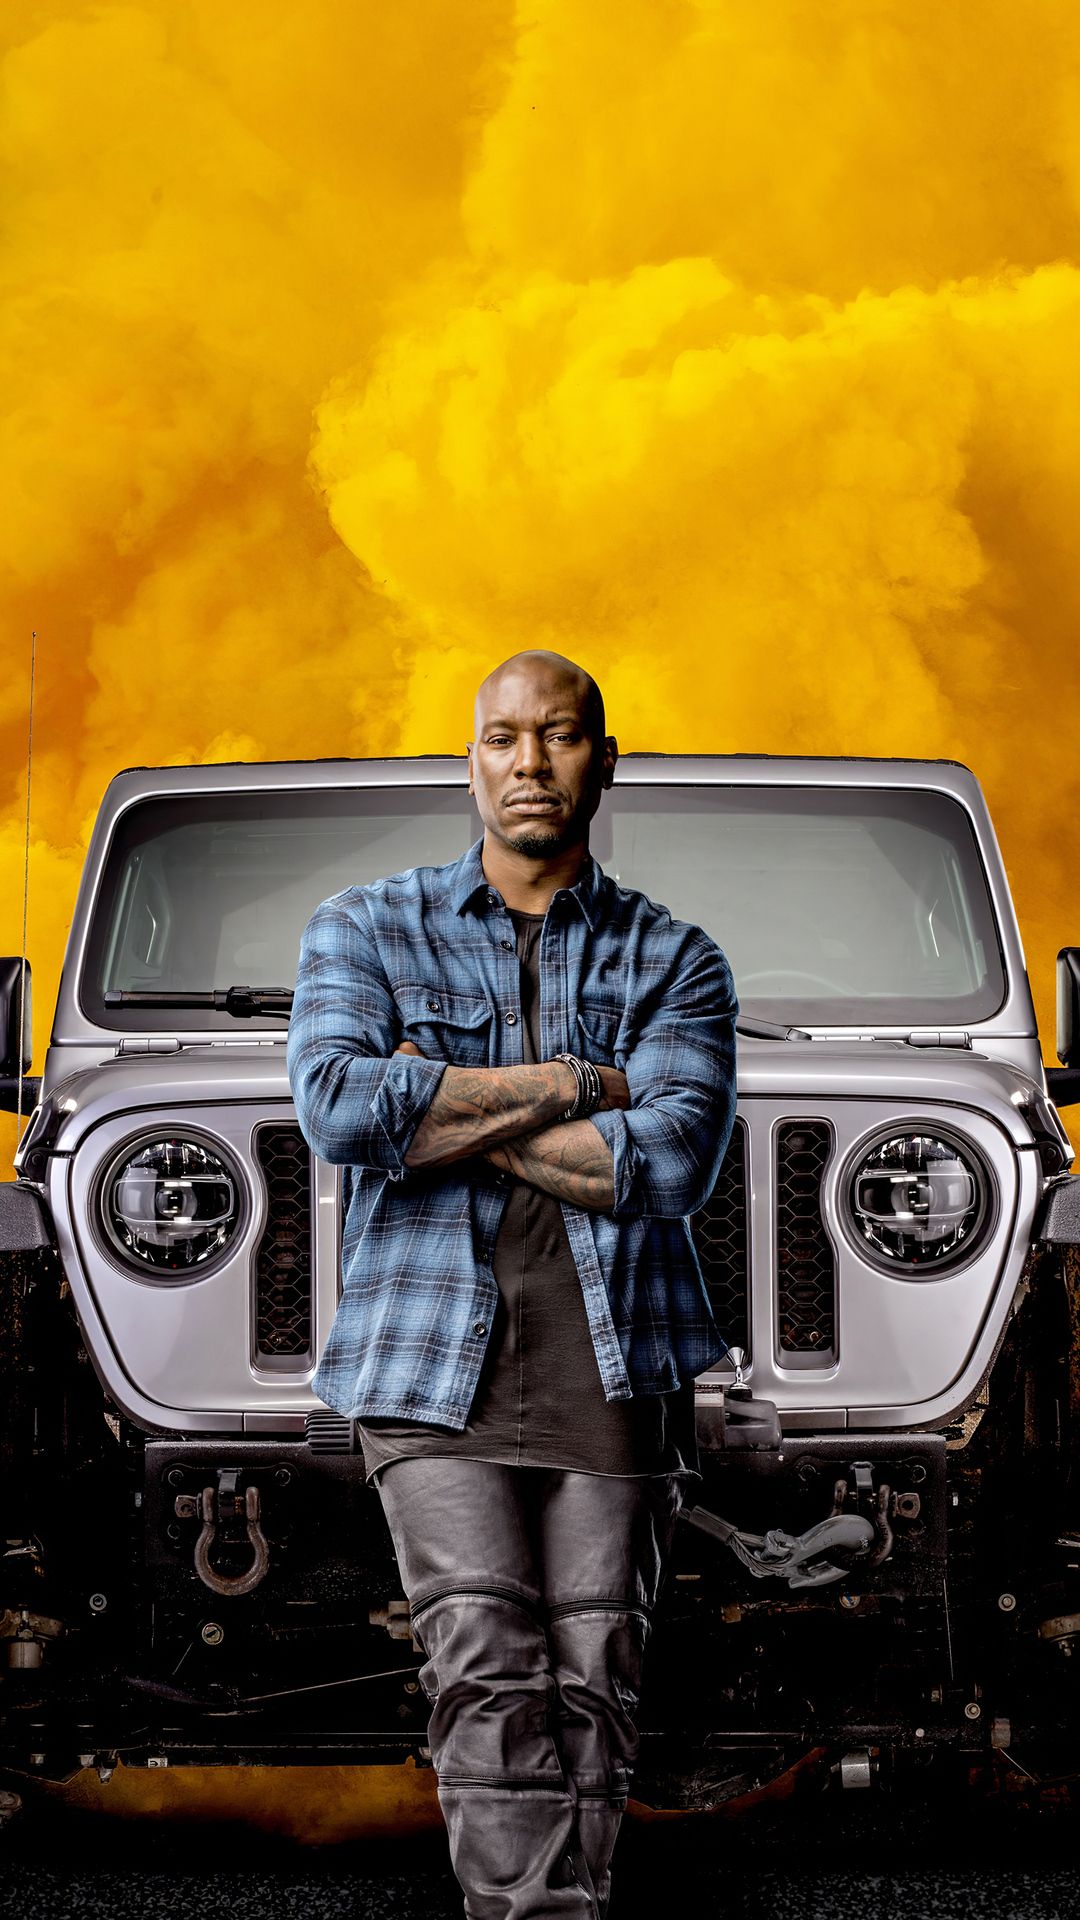 Roman Pearce In Fast And Furious 9 2020 Movie iPhone 6s, 6 Plus, Pixel xl , One Plus 3t, 5 HD 4k Wallpaper, Image, Background, Photo and Picture